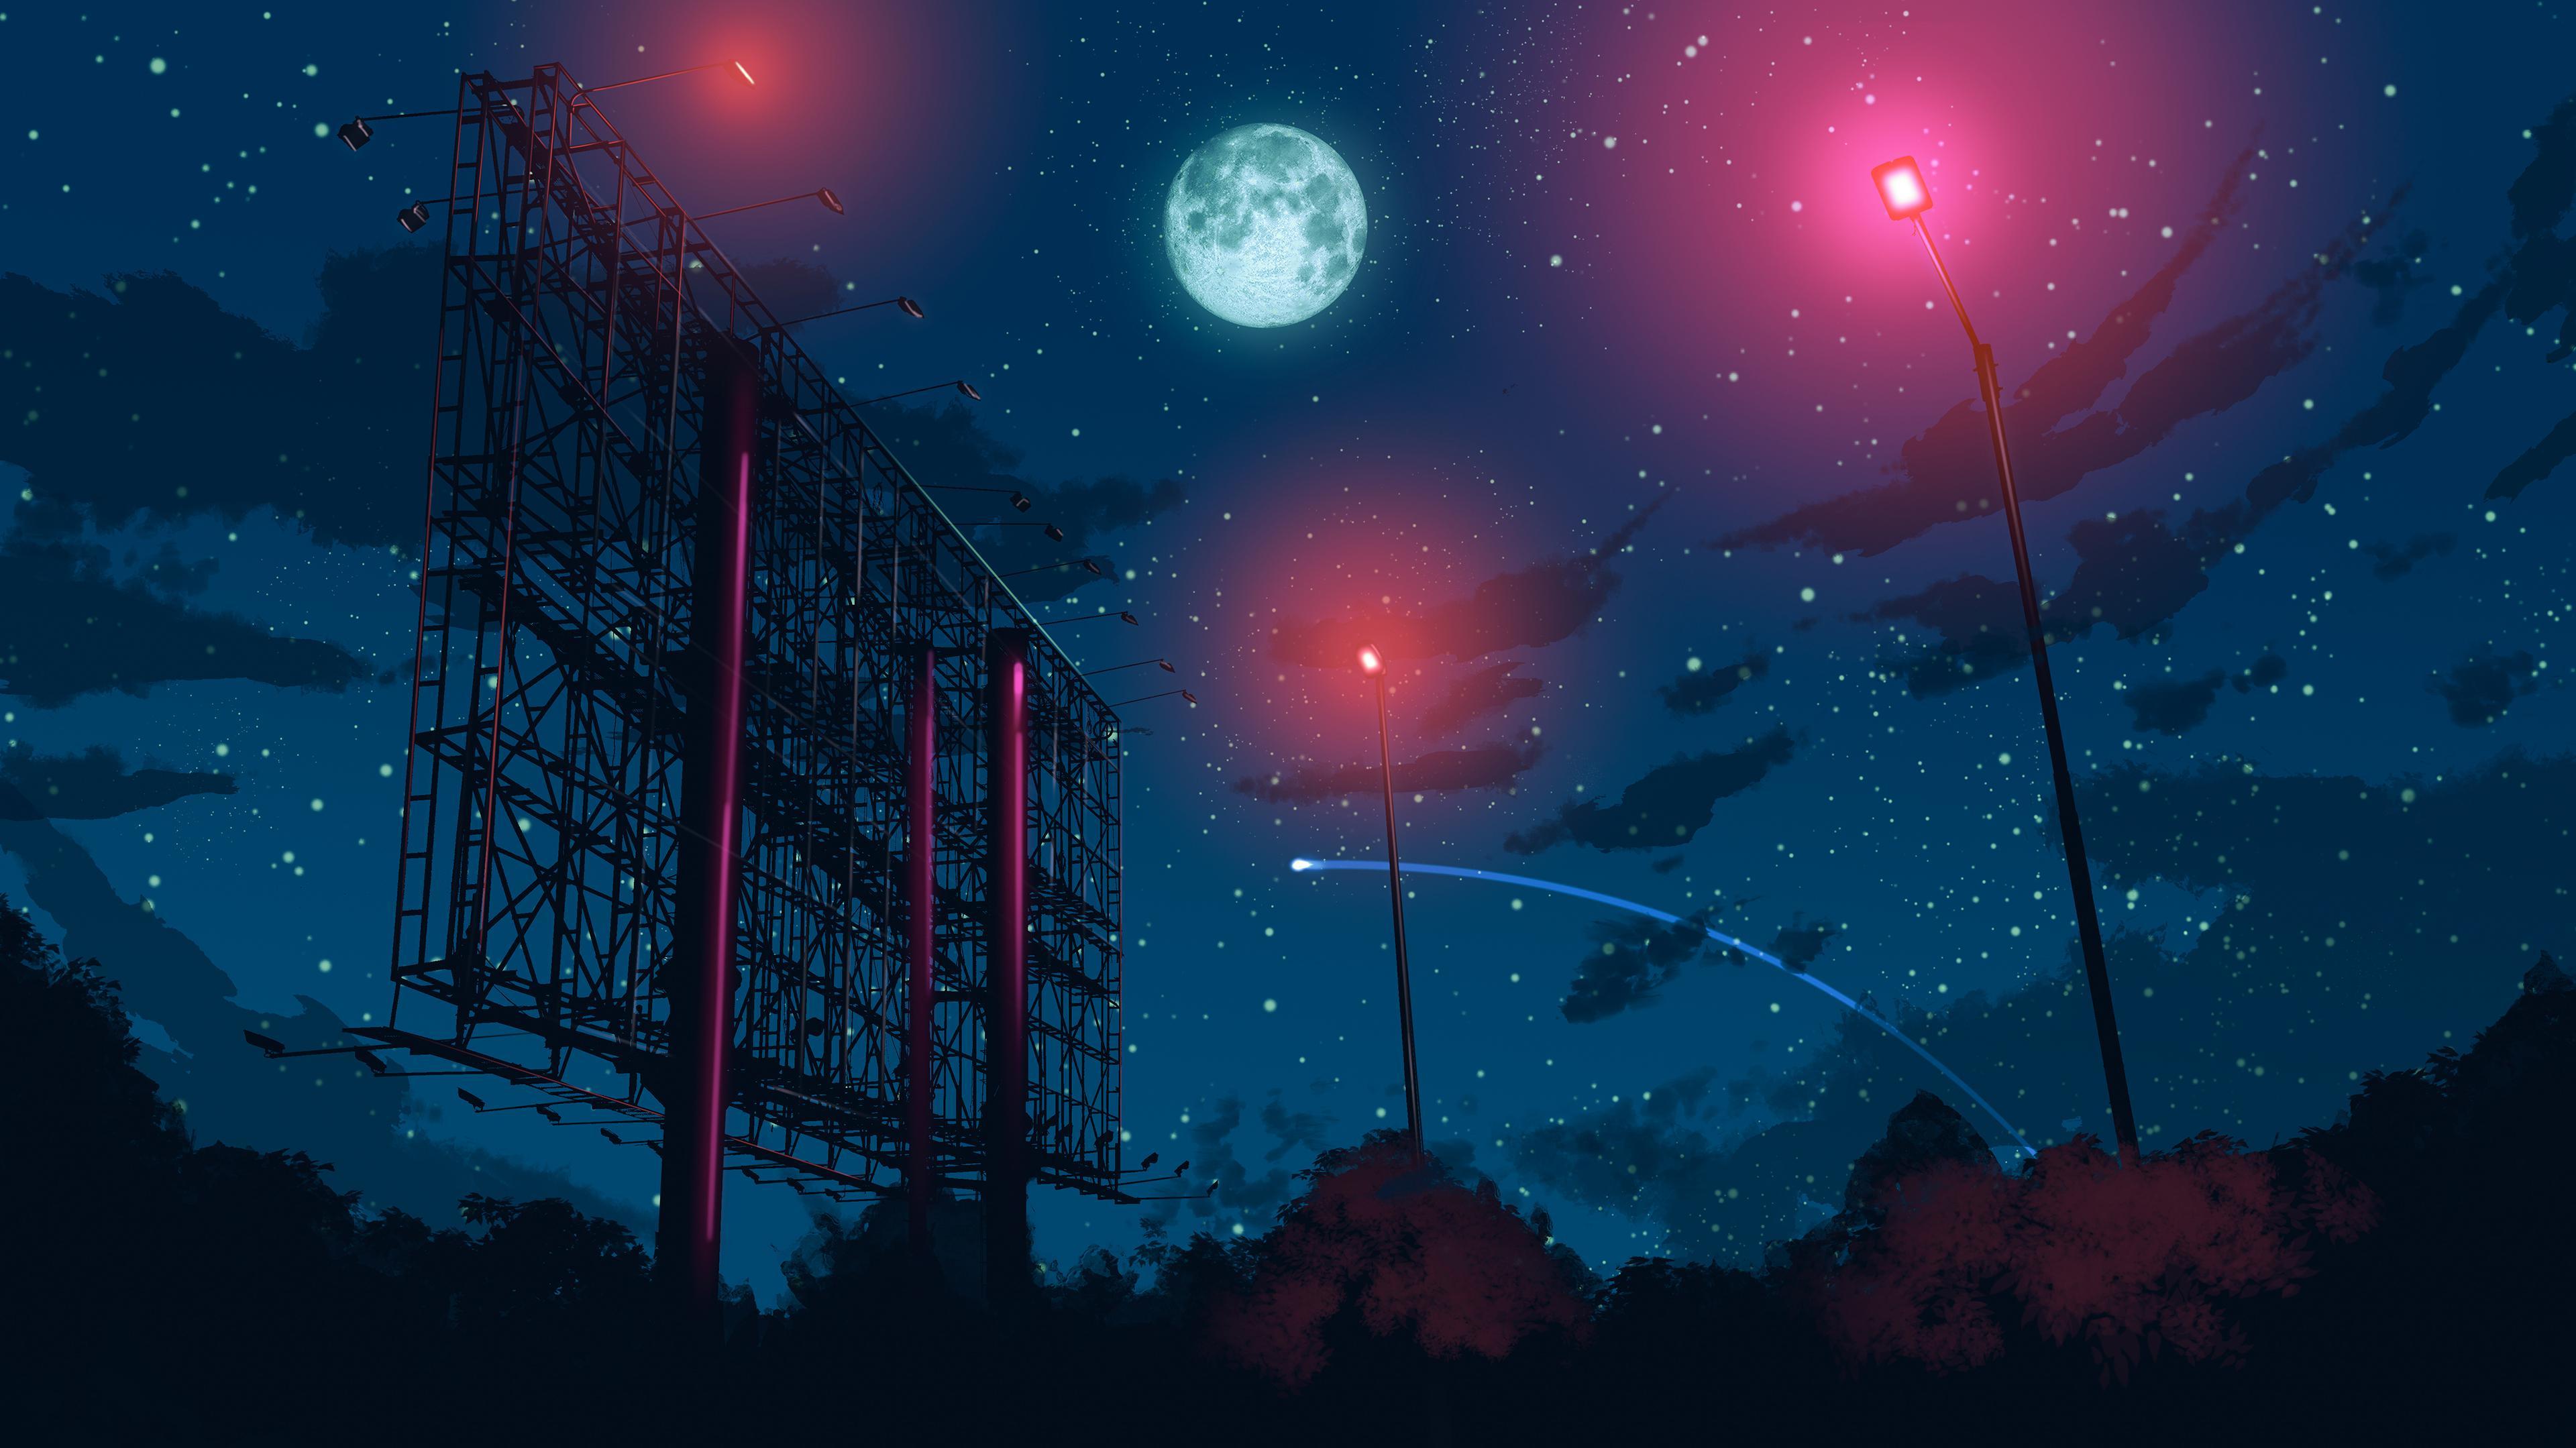 Anime style night sky [3840x2160] Uncropped 6K version link in